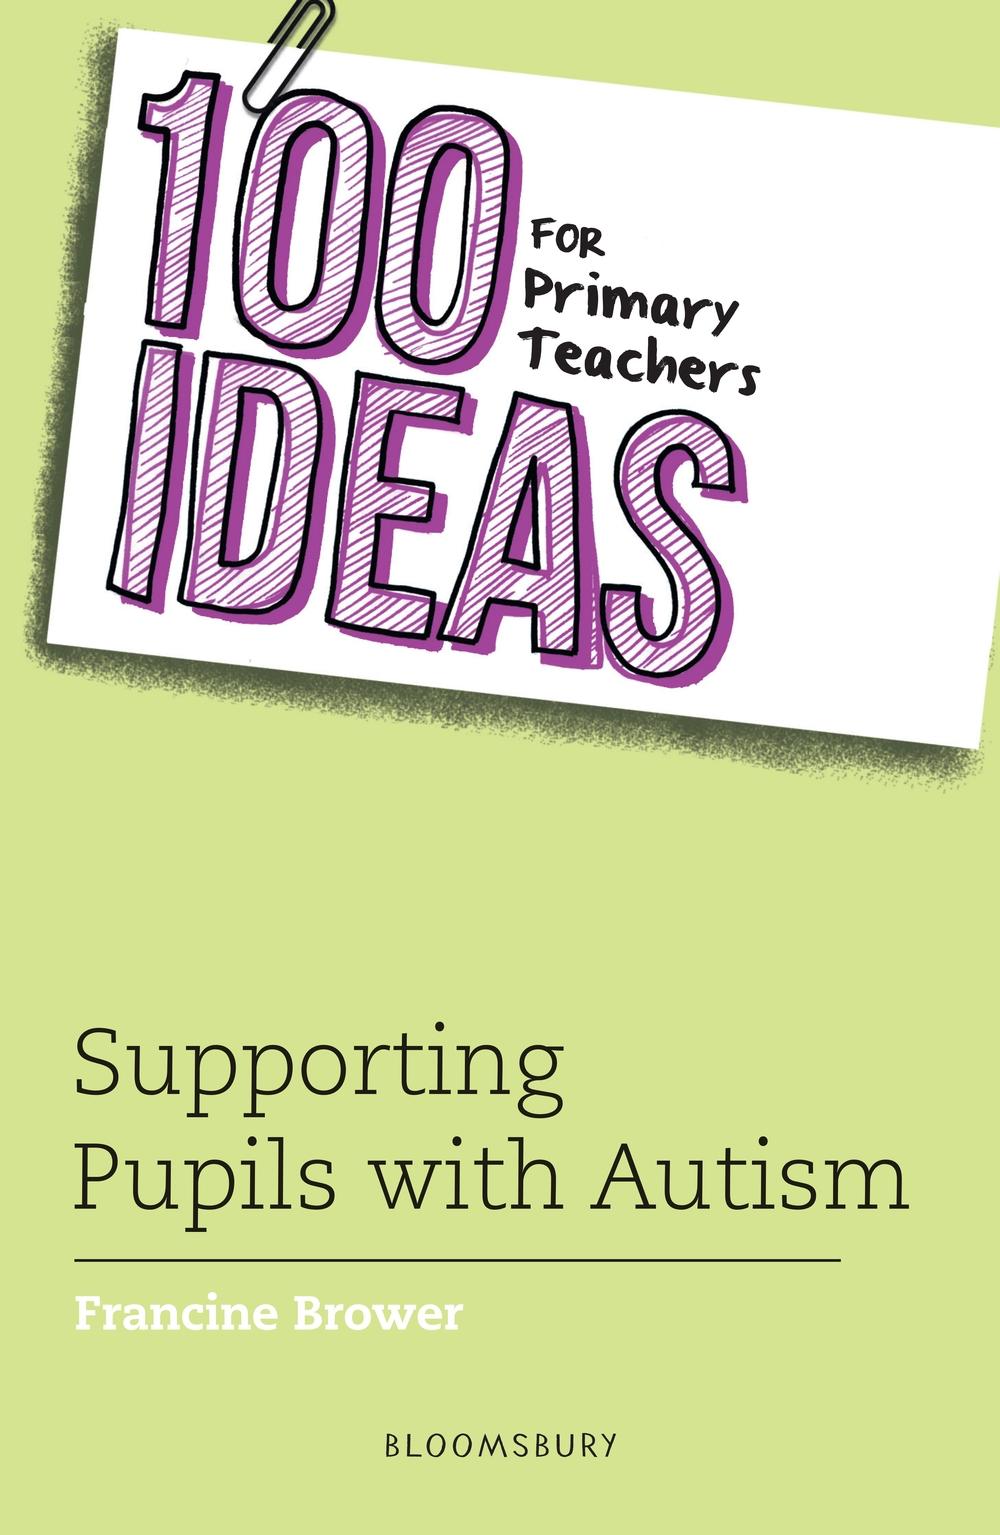 100 Ideas for Primary Teachers: Supporting Pupils with Autis